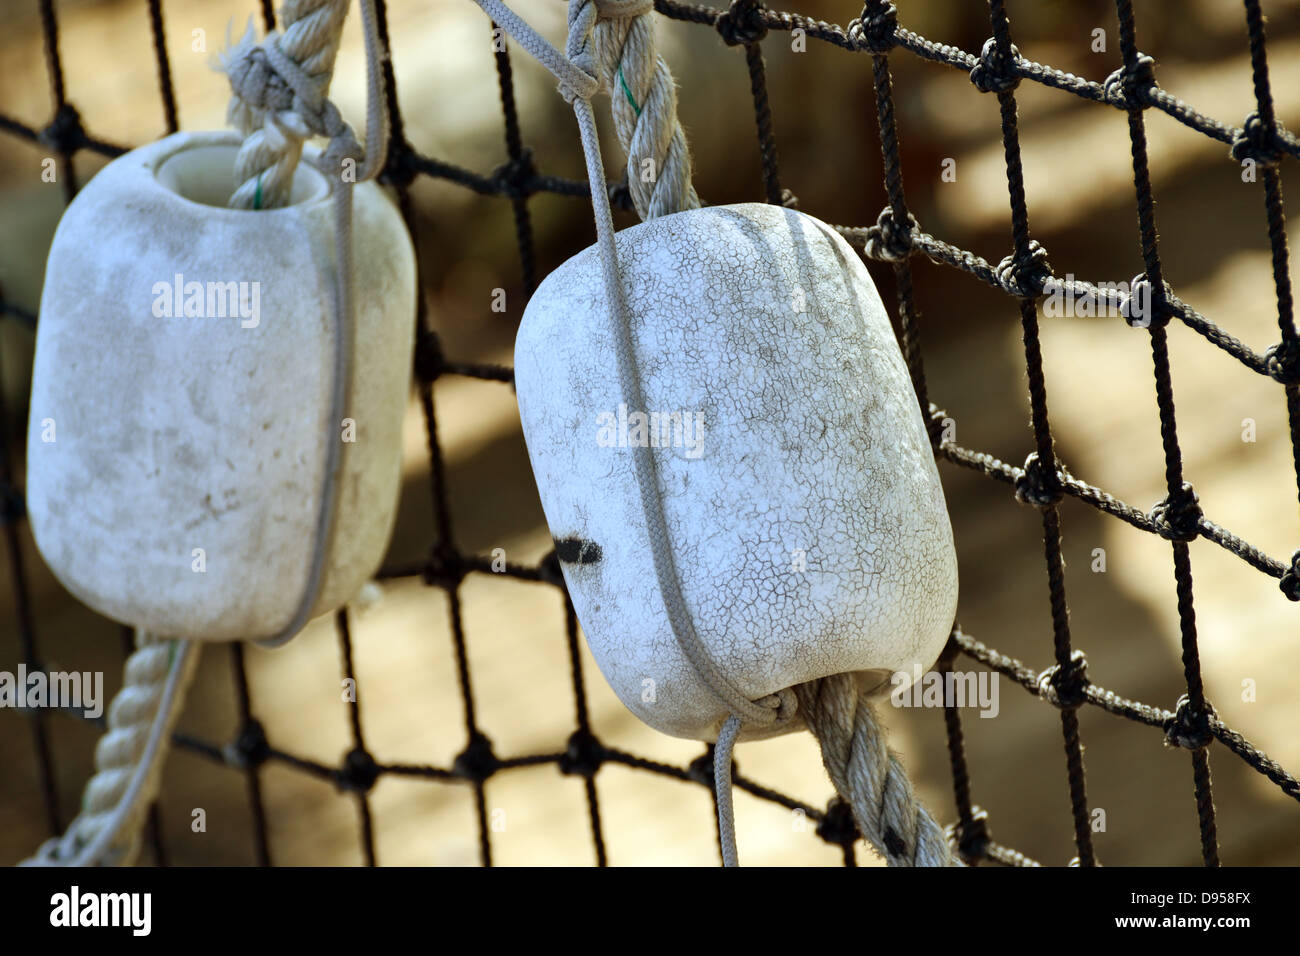 Buoys on a rope and net Stock Photo